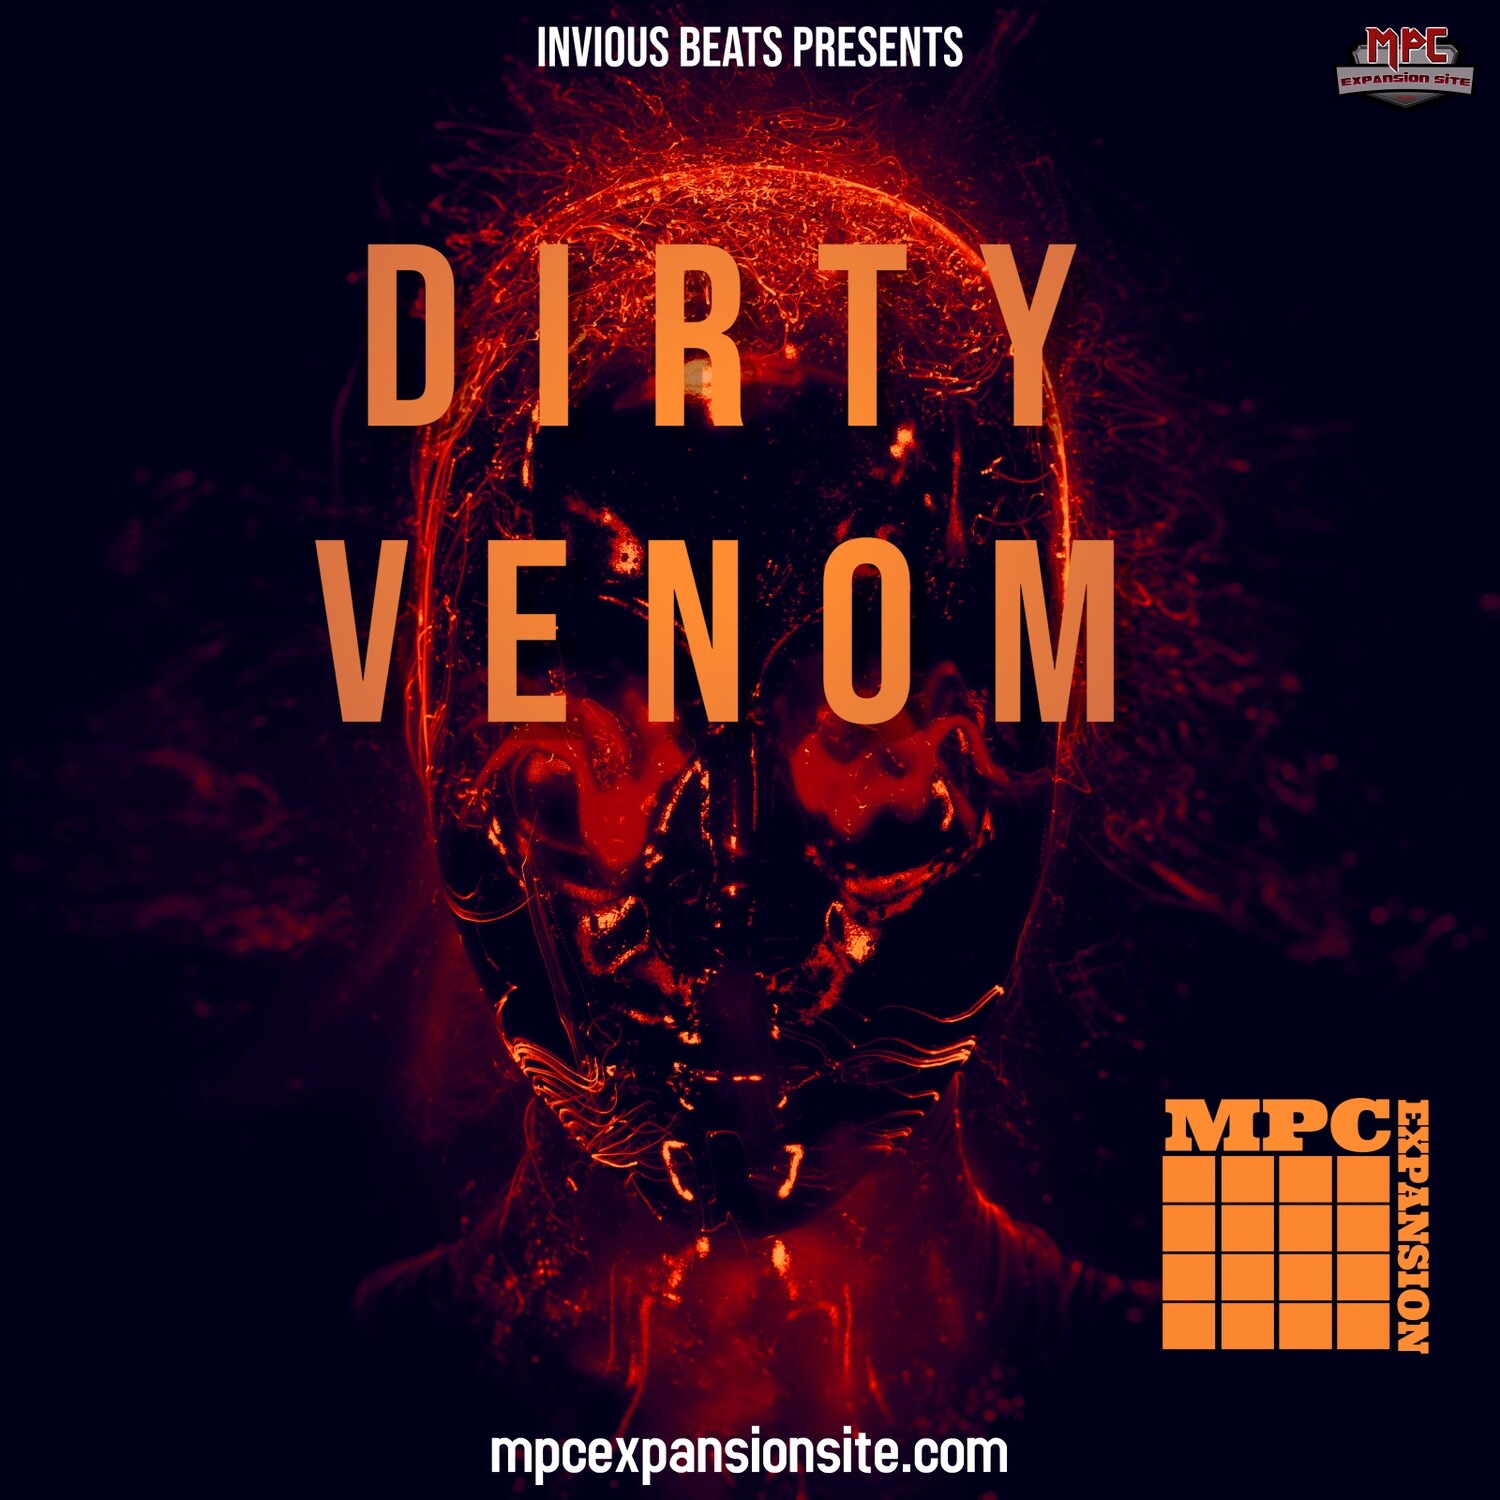 MPC EXPANSION 'DIRTY VENOM' by INVIOUS